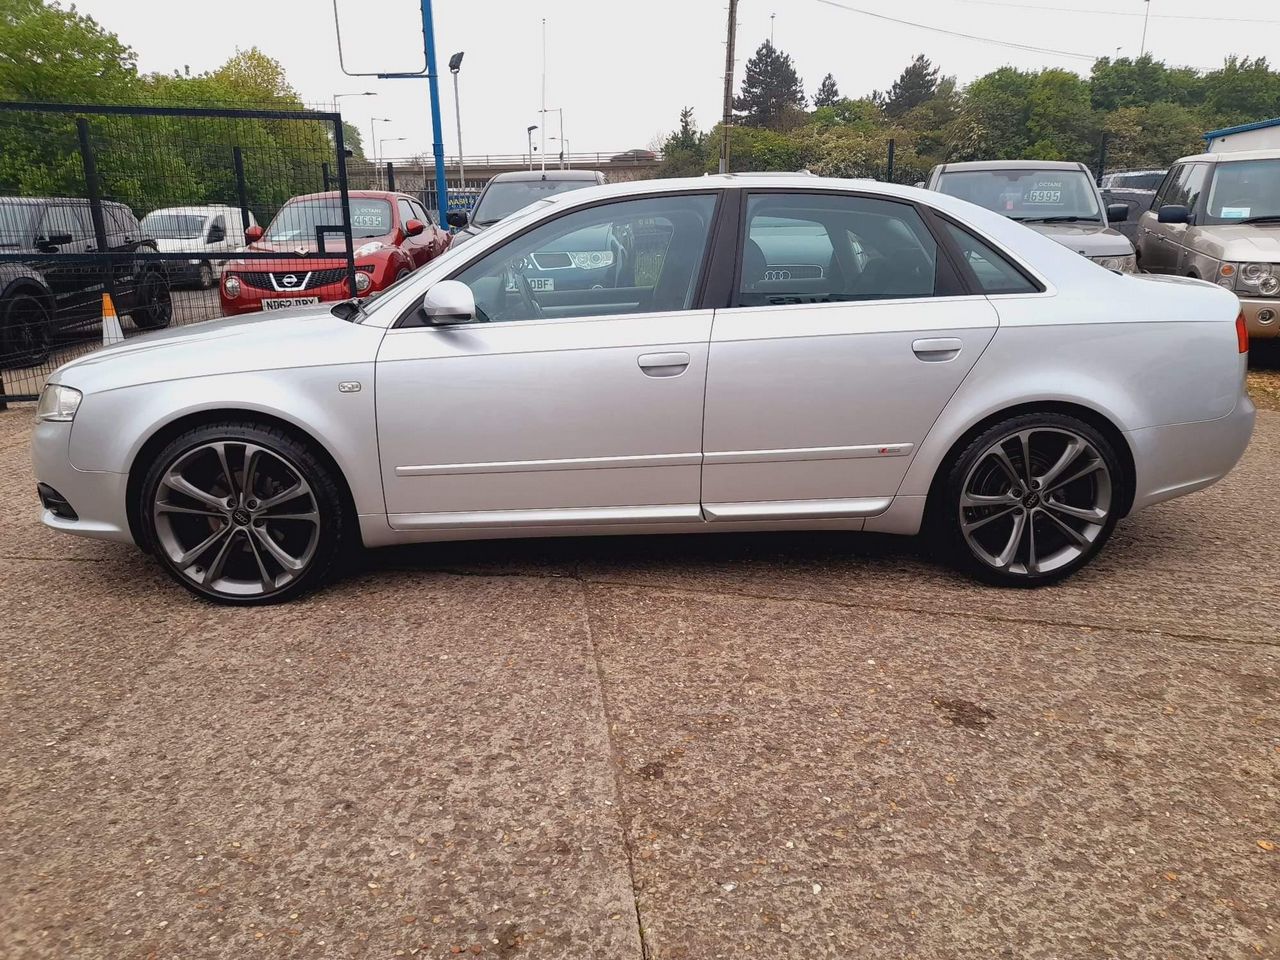 2008 Audi A4 2.0 TDI S line CVT 4dr - Picture 8 of 50